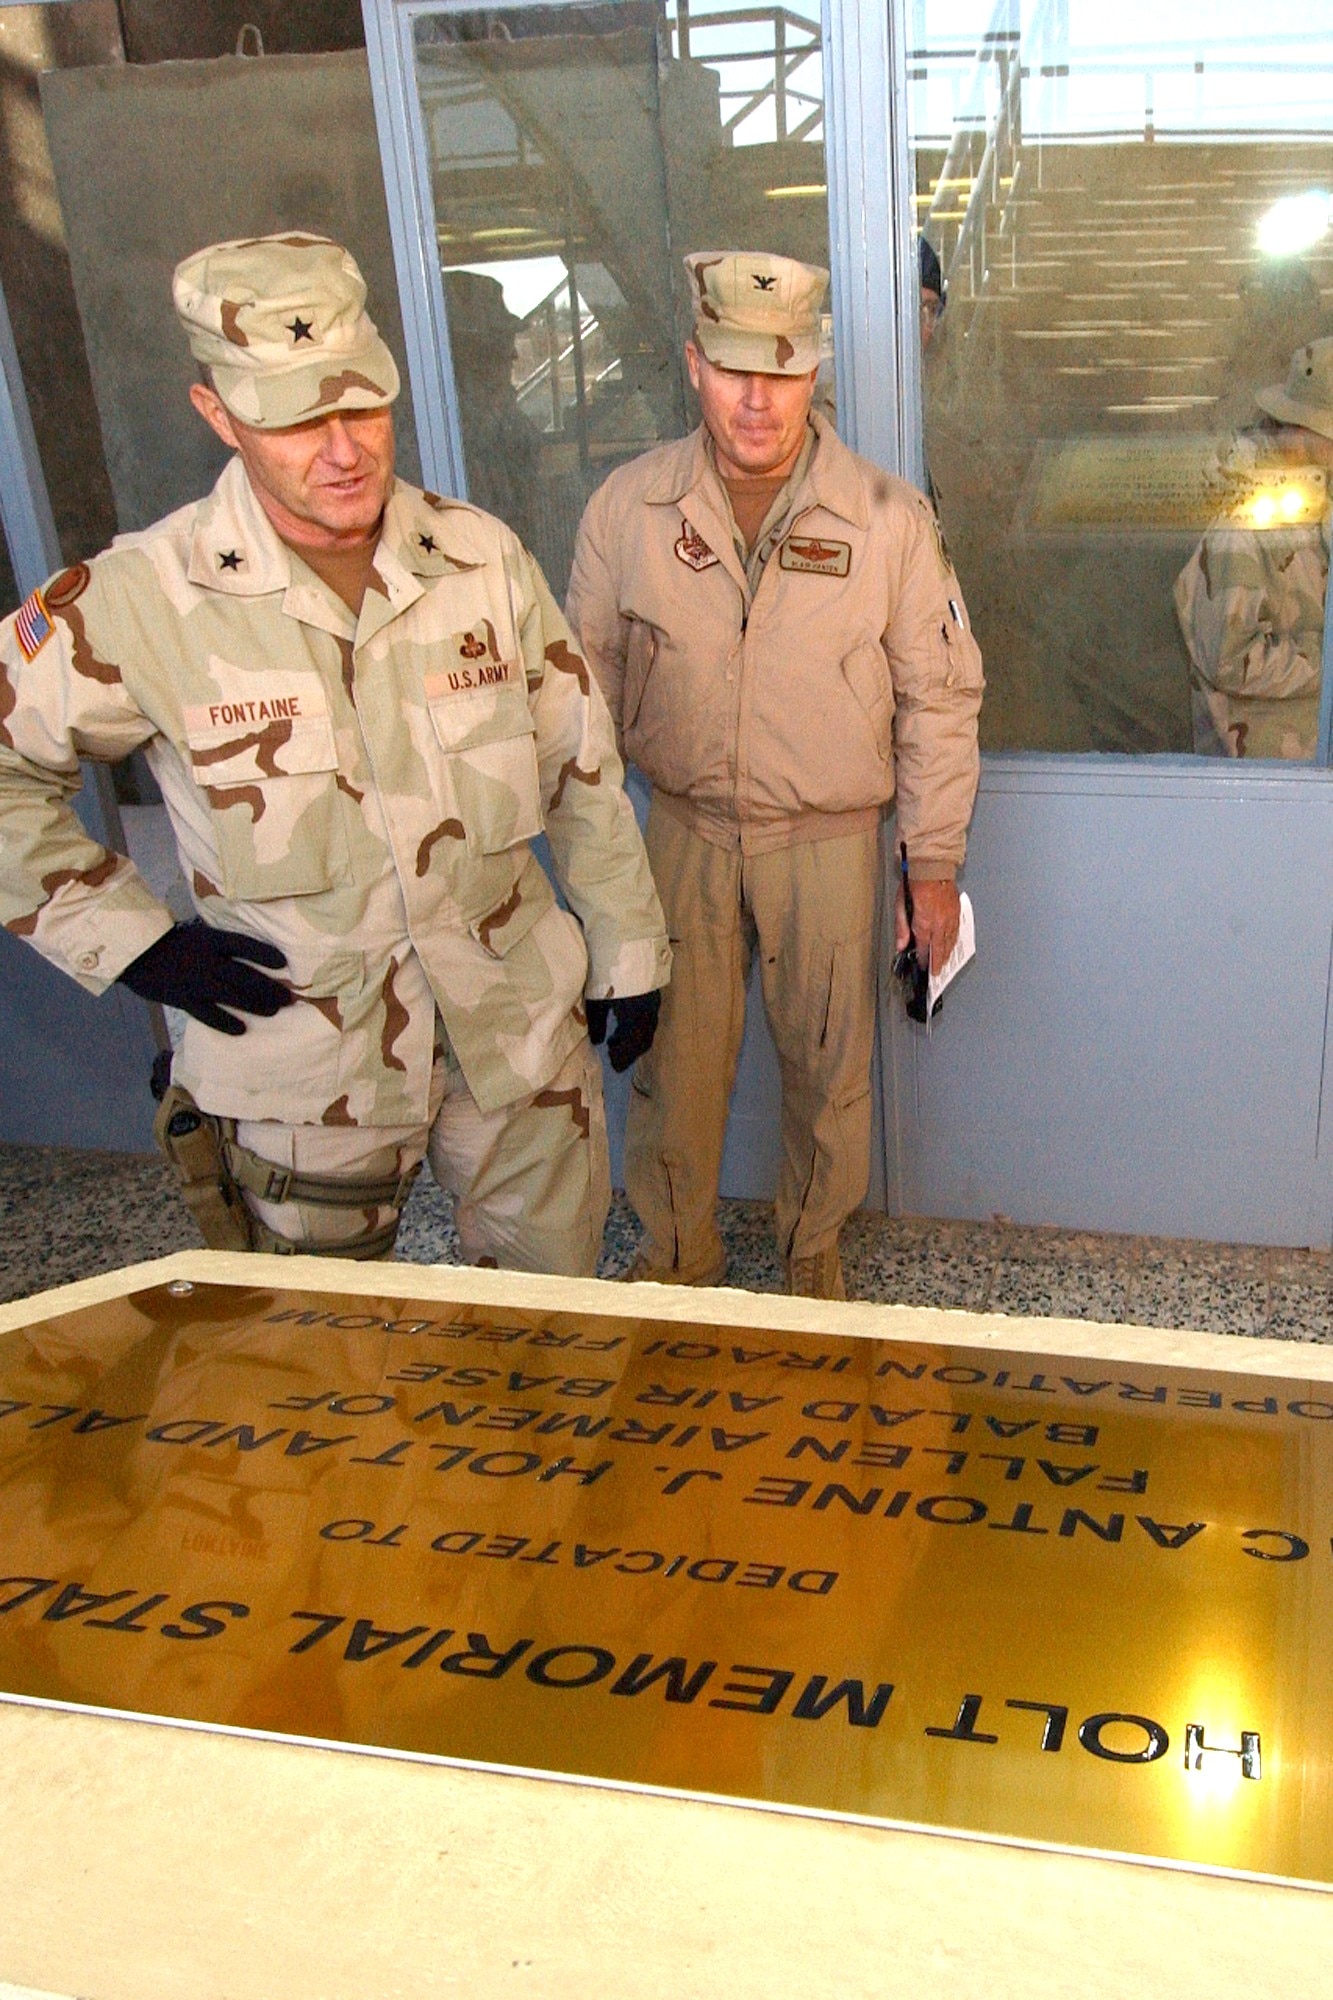 BALAD AIR BASE, Iraq – Army Brig. Gen. Yves Fontaine, commander of the 1st Corps Support Command, and Col. Blair E. Hansen, 332nd Air Expeditionary Wing commander, read a plaque which dedicates the base stadium to Airman 1st Class Antoine J. Holt, who died in April during an attack on the base. (Air Force photo by Tech. Sgt. Robert Jensen)